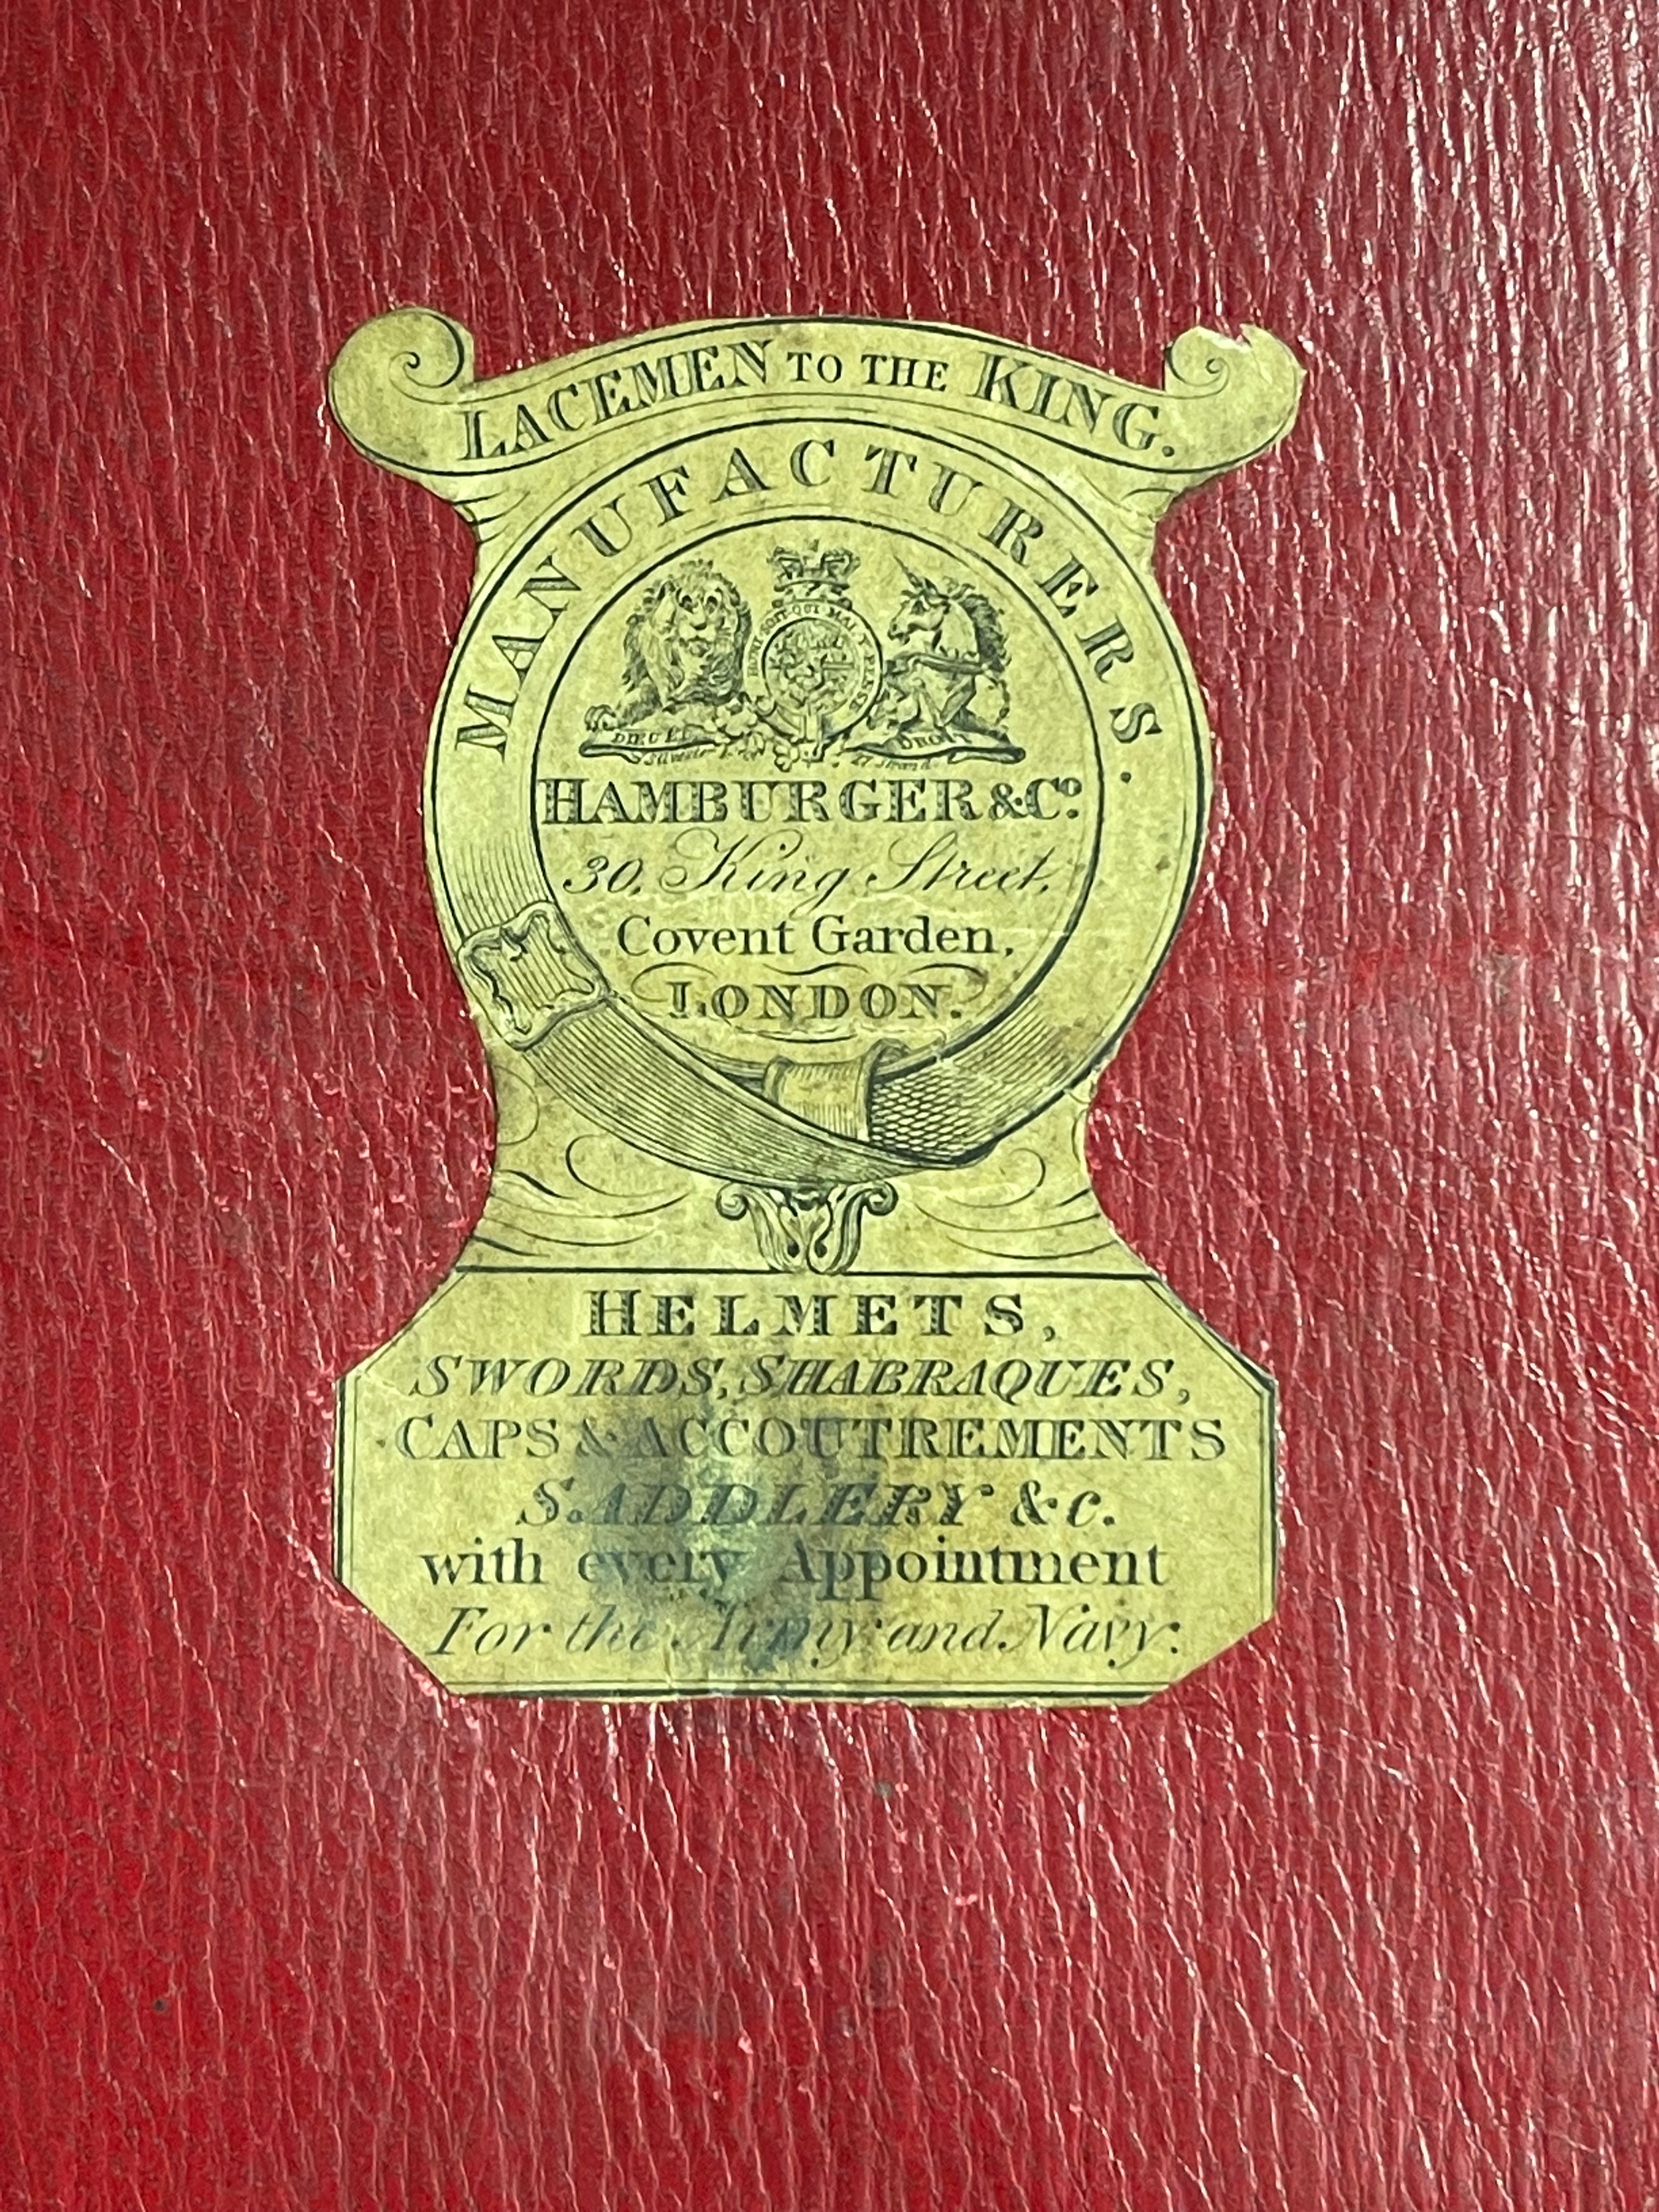 8th Kings Royal Irish Hussars Officers Sabretache. Paper makers label to interior for "Hamburger & - Image 4 of 6